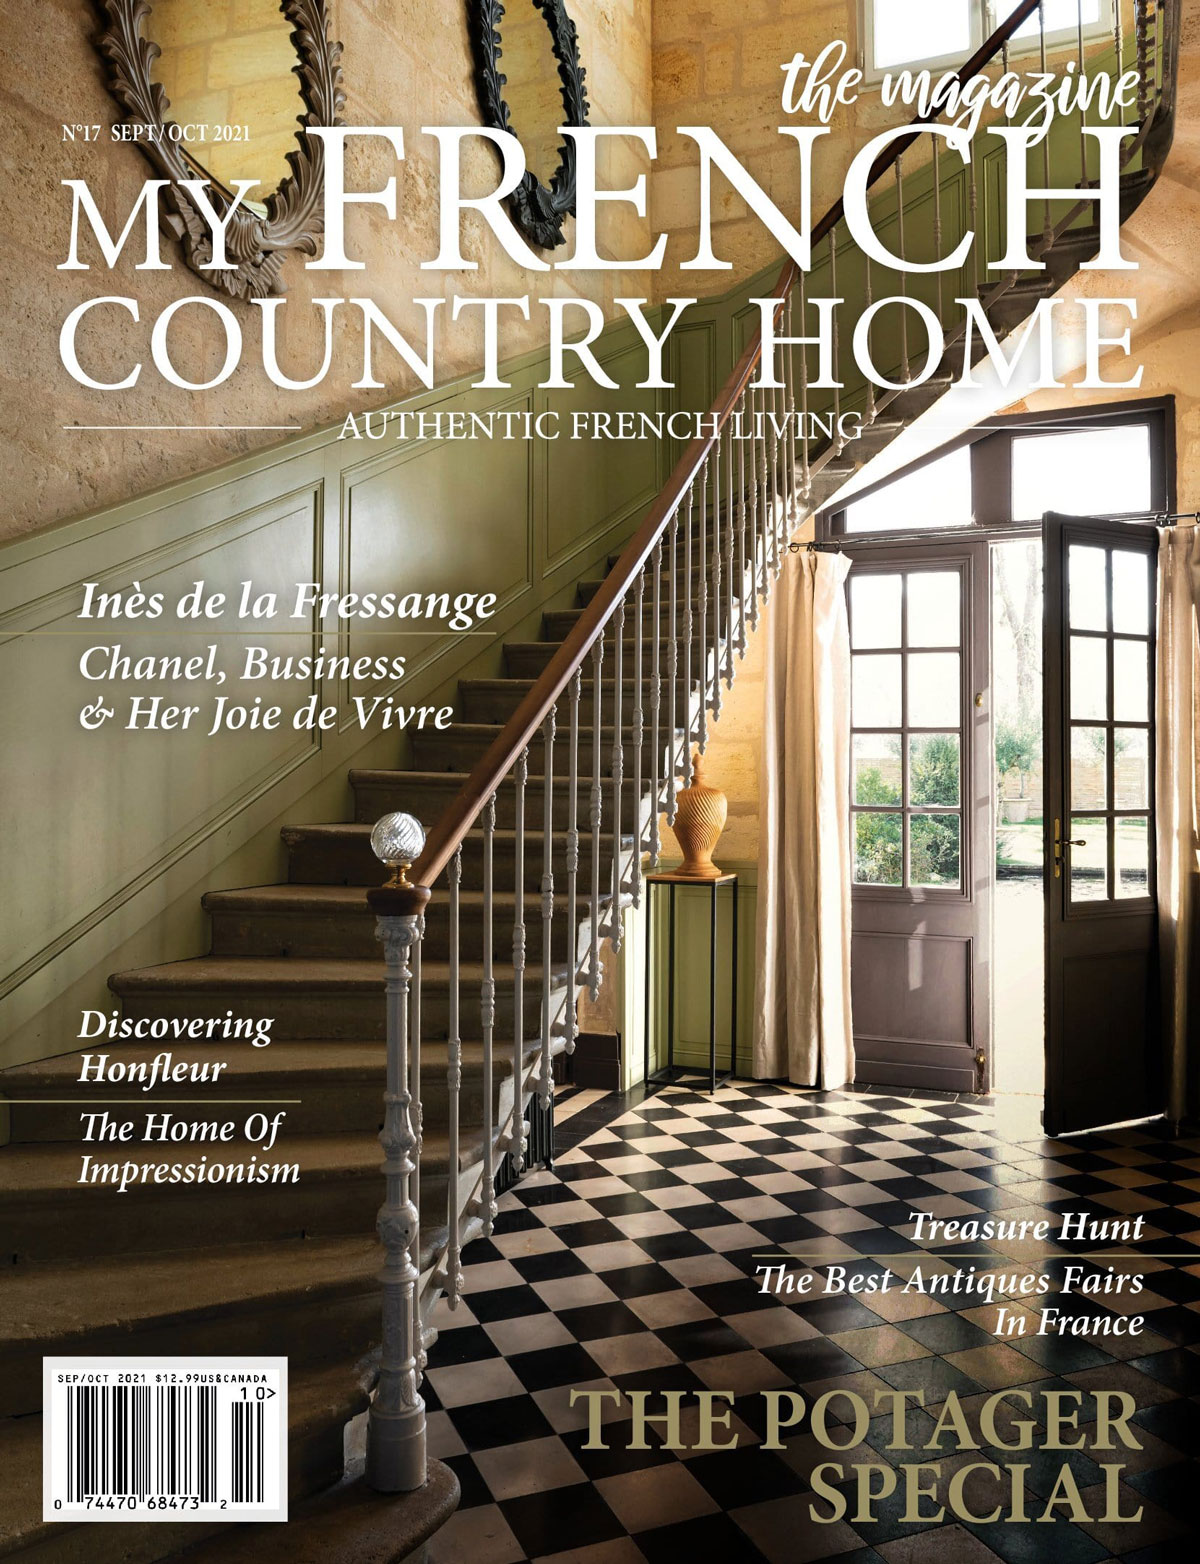 Cover image from My French Country Home, with tiled floor and staircase in country France